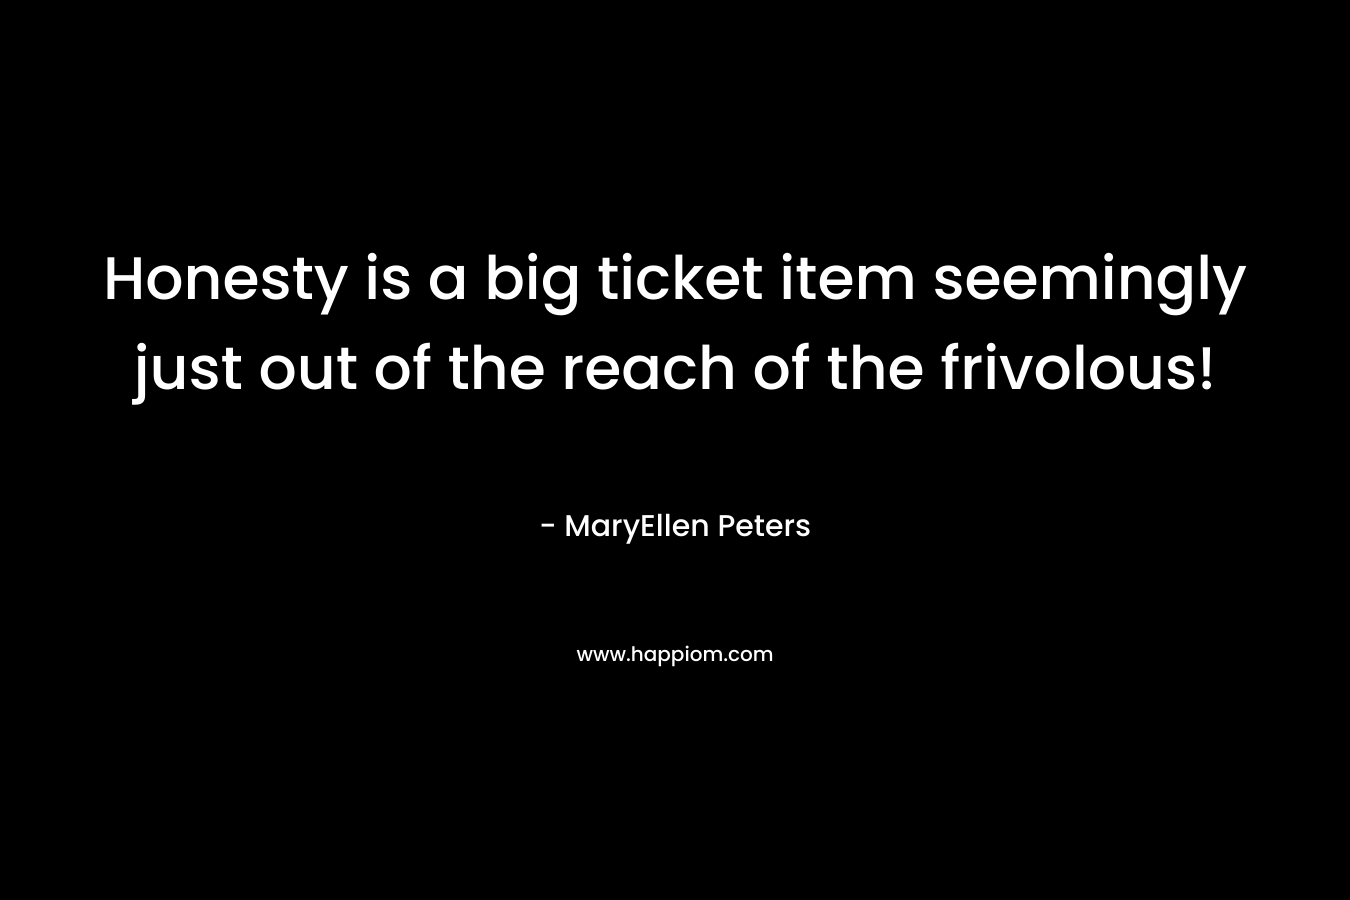 Honesty is a big ticket item seemingly just out of the reach of the frivolous! – MaryEllen Peters